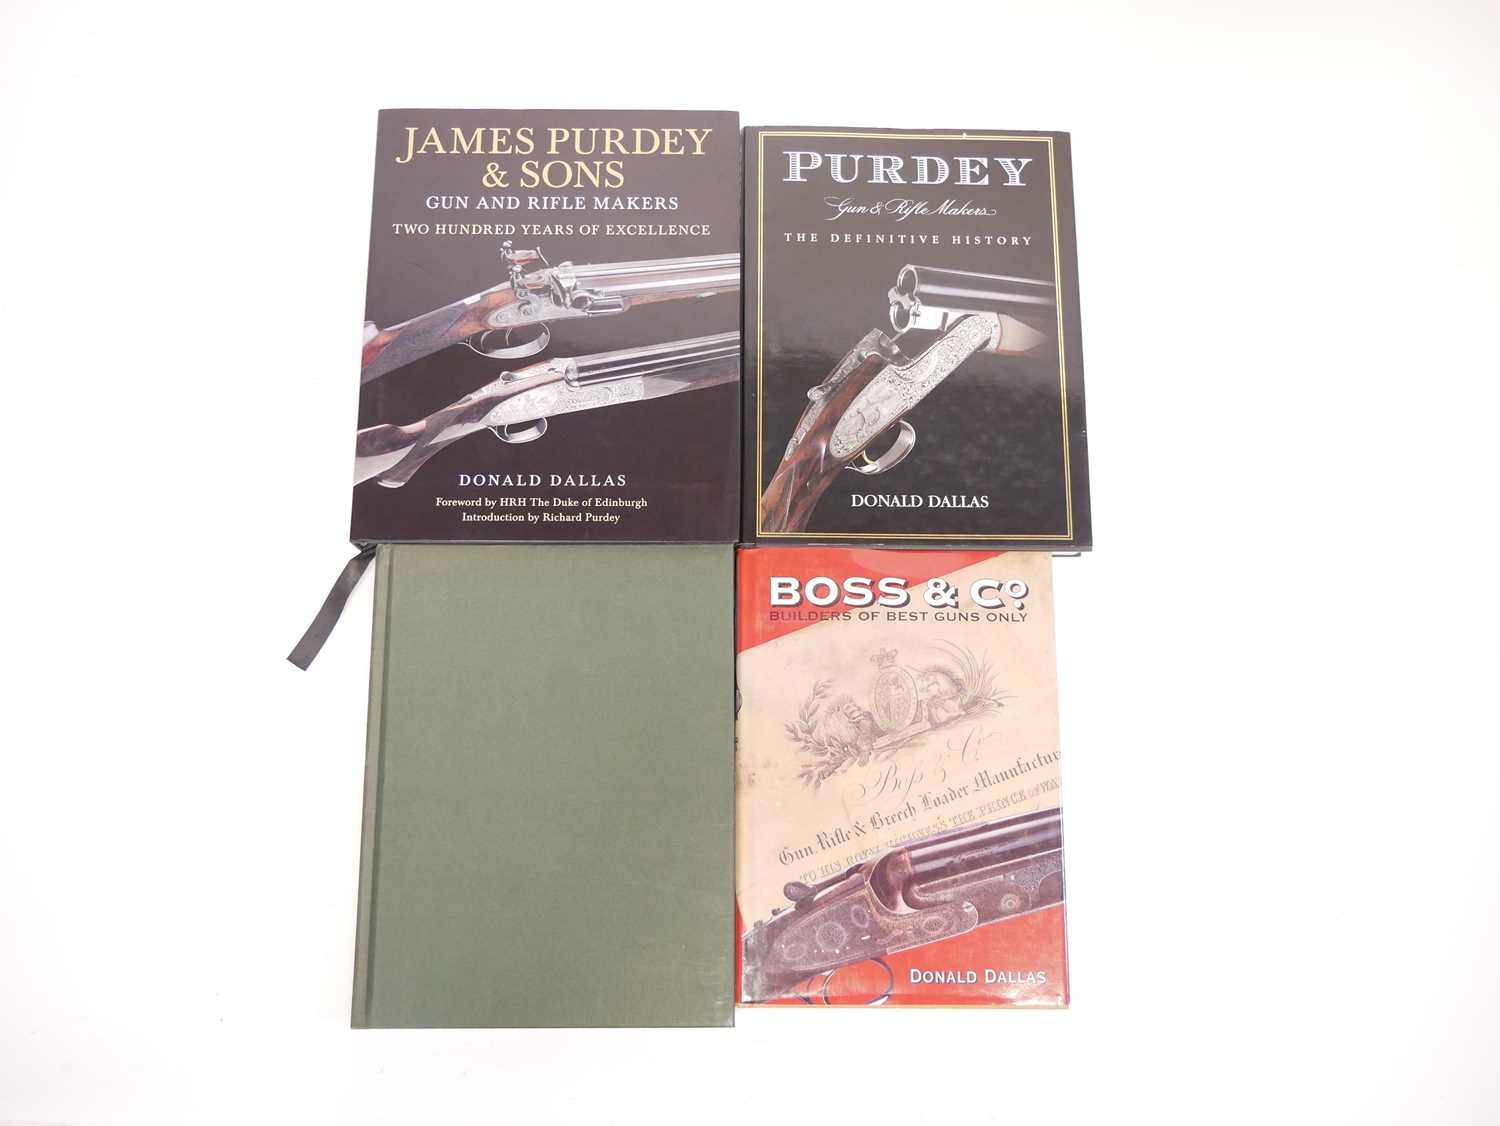 Four books on London gunmakers, including two copies on Boss & Co by Donald Dallas, and two books on - Image 2 of 4